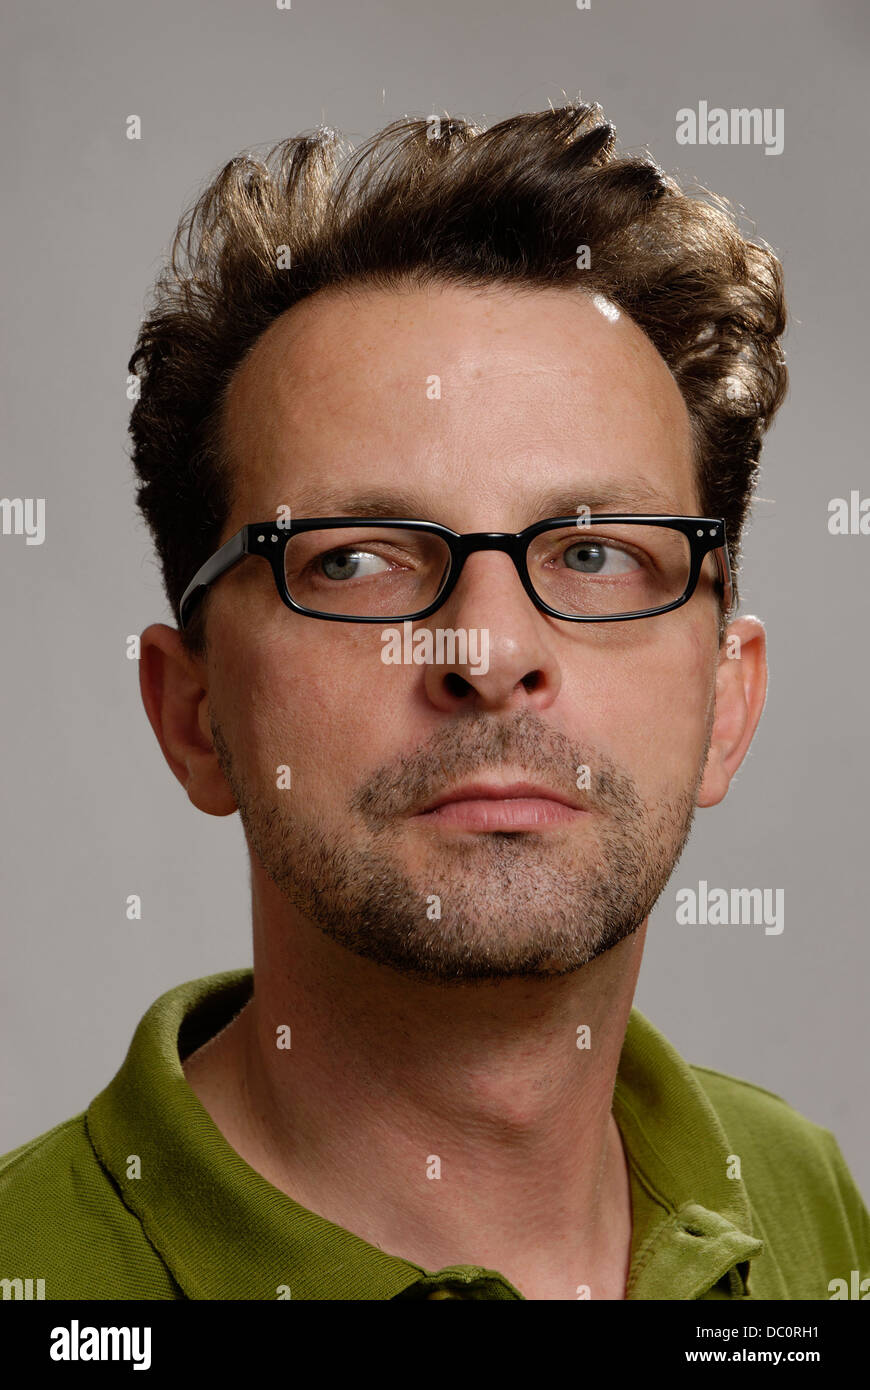 A man with glasses, a green polo shirt and unshaven Stock Photo